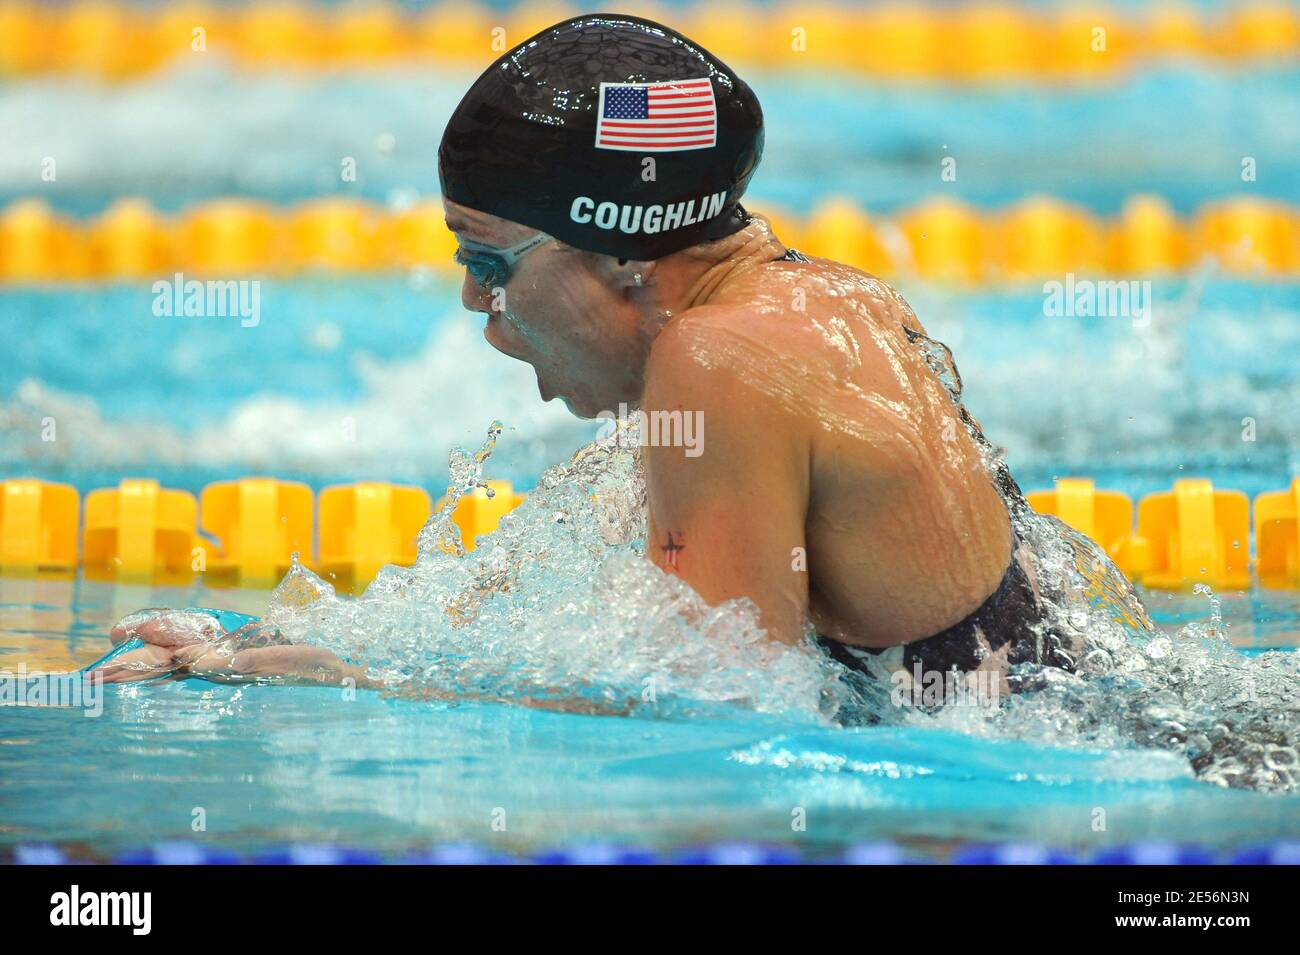 Natalie Coughlin of the United States competes in the Women's 200m Individual Medley Semifinal held at the National Aquatics Center on Day 4 of the Beijing 2008 Olympic Games on August 12, 2008 in Beijing, China. Photo by Gouhier-Hahn-Nebinger/Cameleon/ABACAPRESS.COM Stock Photo